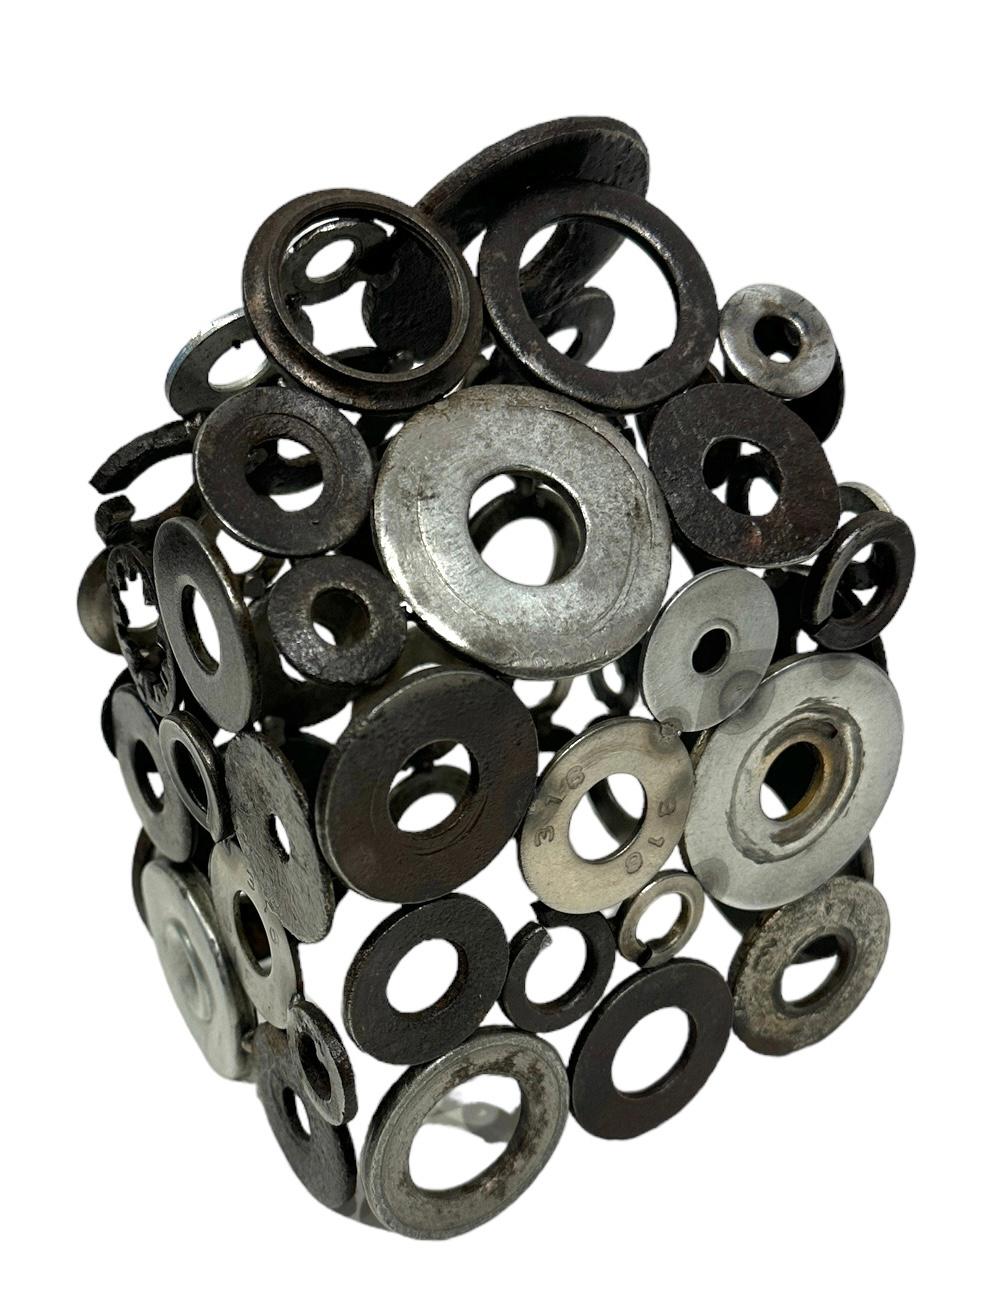 Jim Rose, known primarily for his steel furniture, was an avid collector and scoured salvage yards for unique, interesting items.  Here he has welded together various washers and cylindrical objects to form a house structure. The precision of the